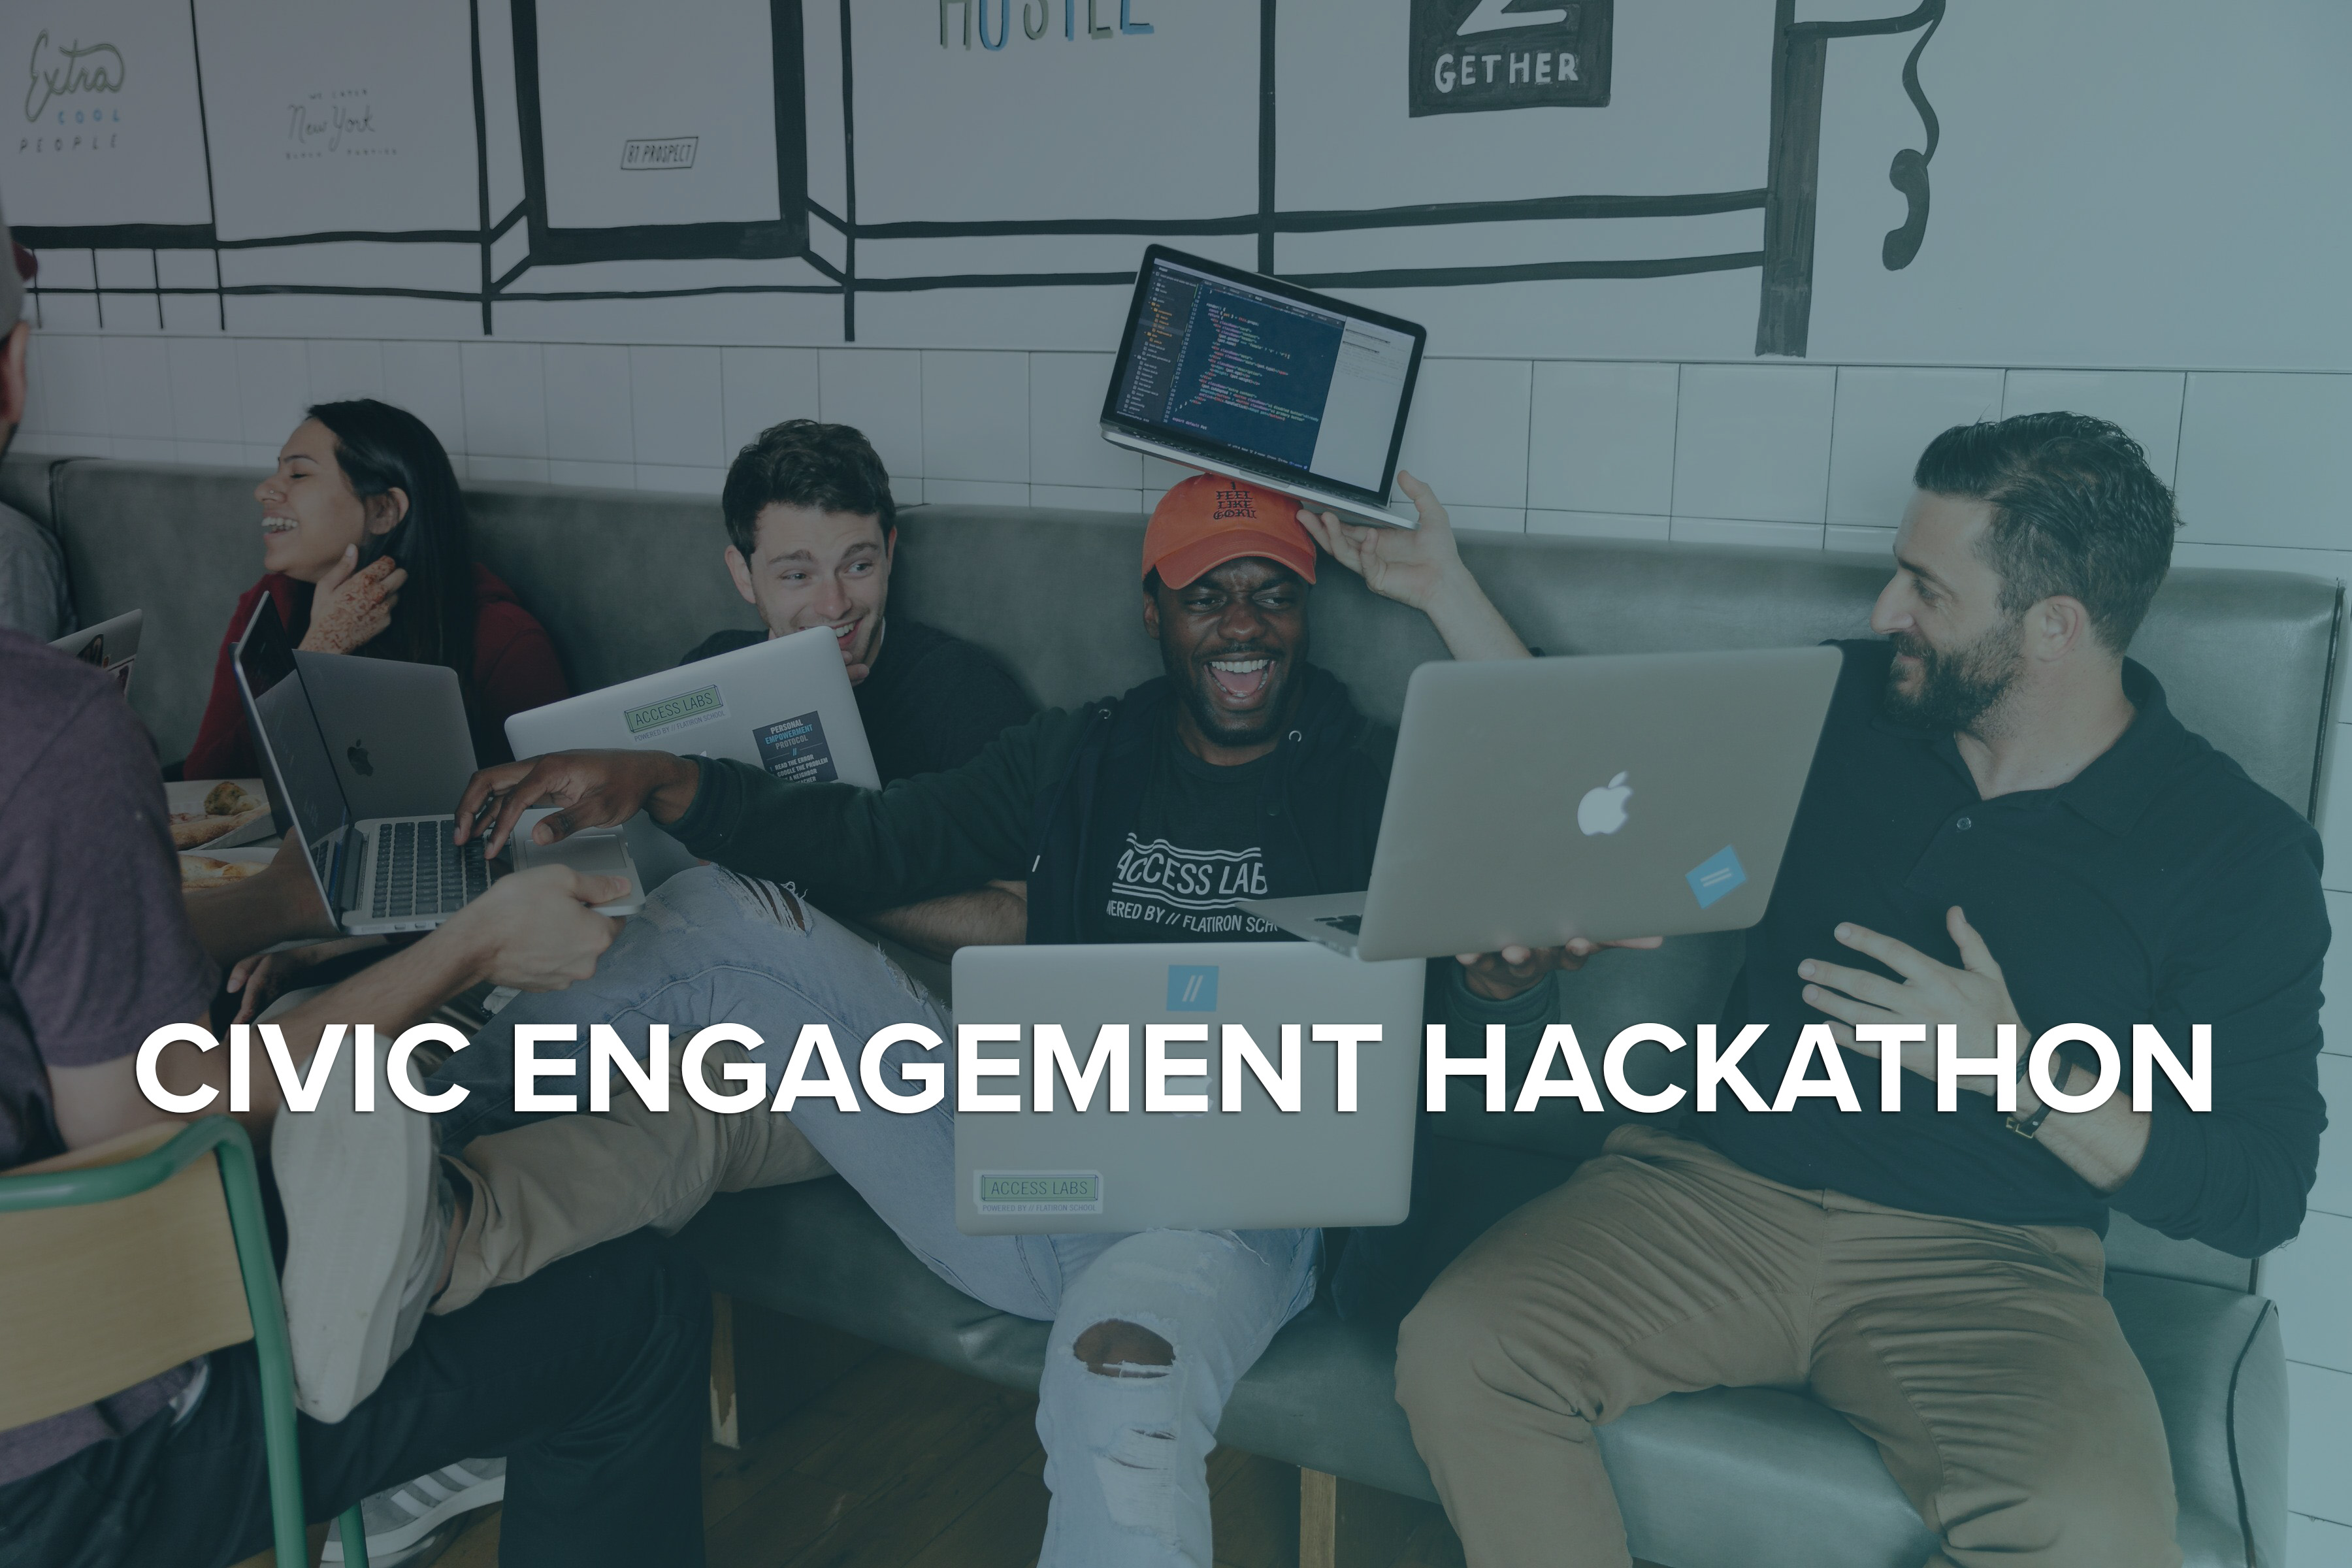 Four people with laptops laughing. Text on screen reads "Civic Engagement Hackathon"